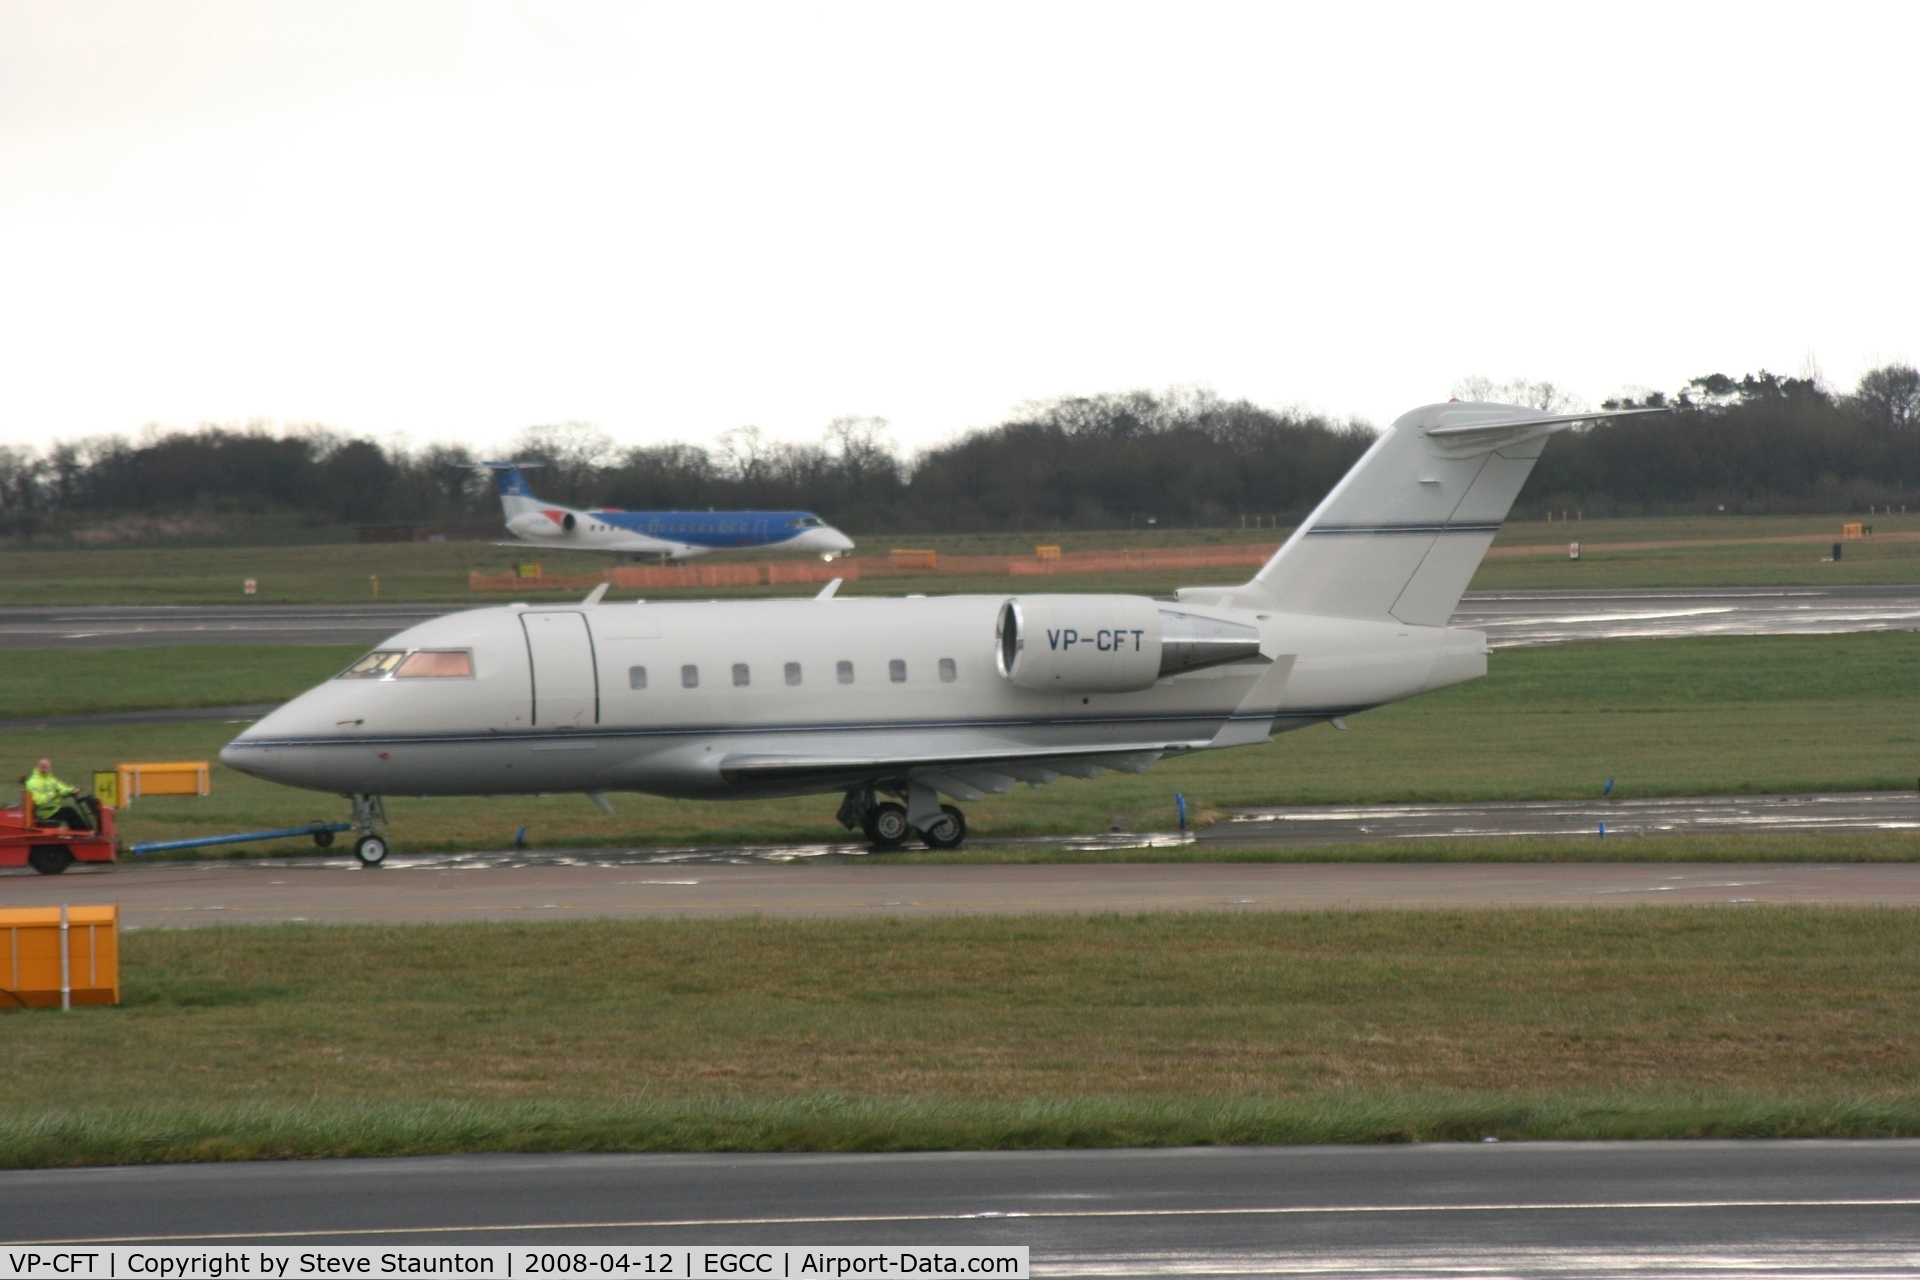 VP-CFT, 1990 Canadair Challenger 601-3A (CL-600-2B16) C/N 5067, Taken at Manchester Airport on a typical showery April day